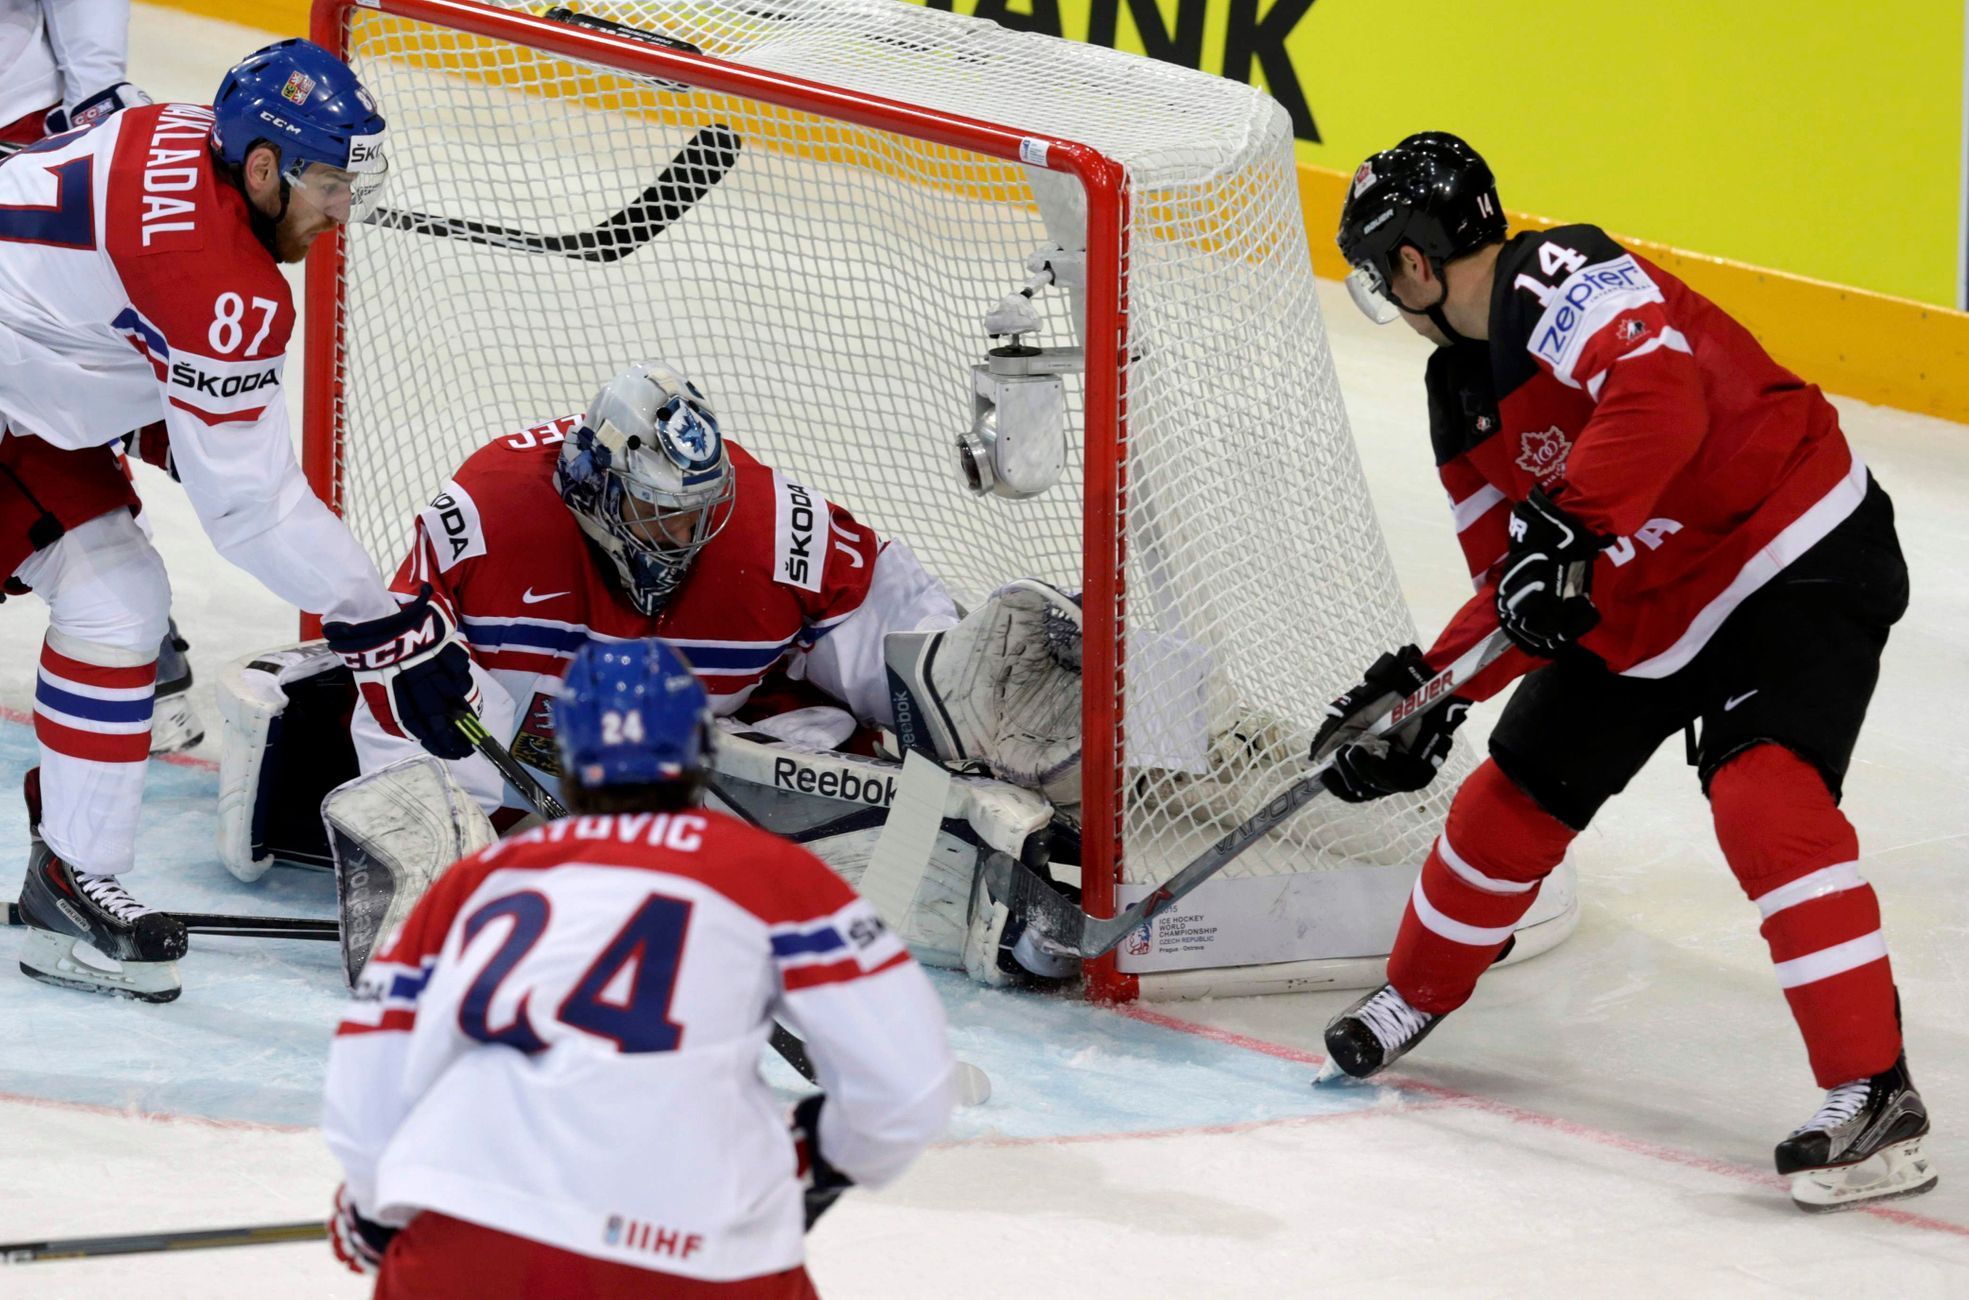 Canada's Eberle wraps around a goal past goaltender Pavelec of the Czech Republic during their Ice Hockey World Championship game against Sweden at the O2 arena in Prague